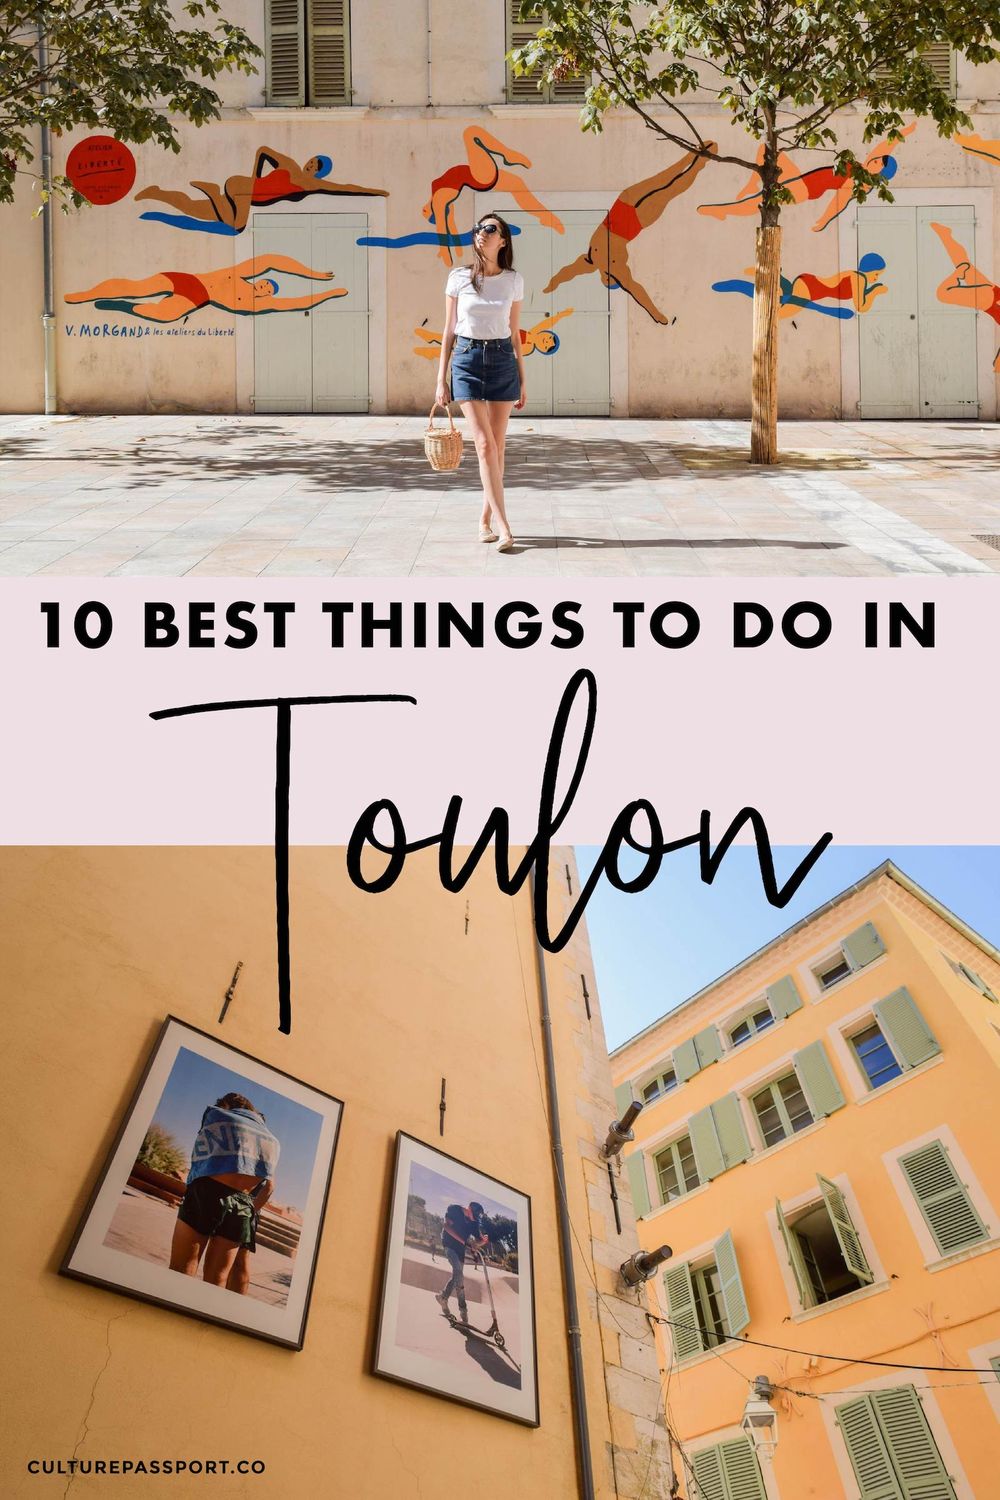 10 Best Things to Do in Toulon France!